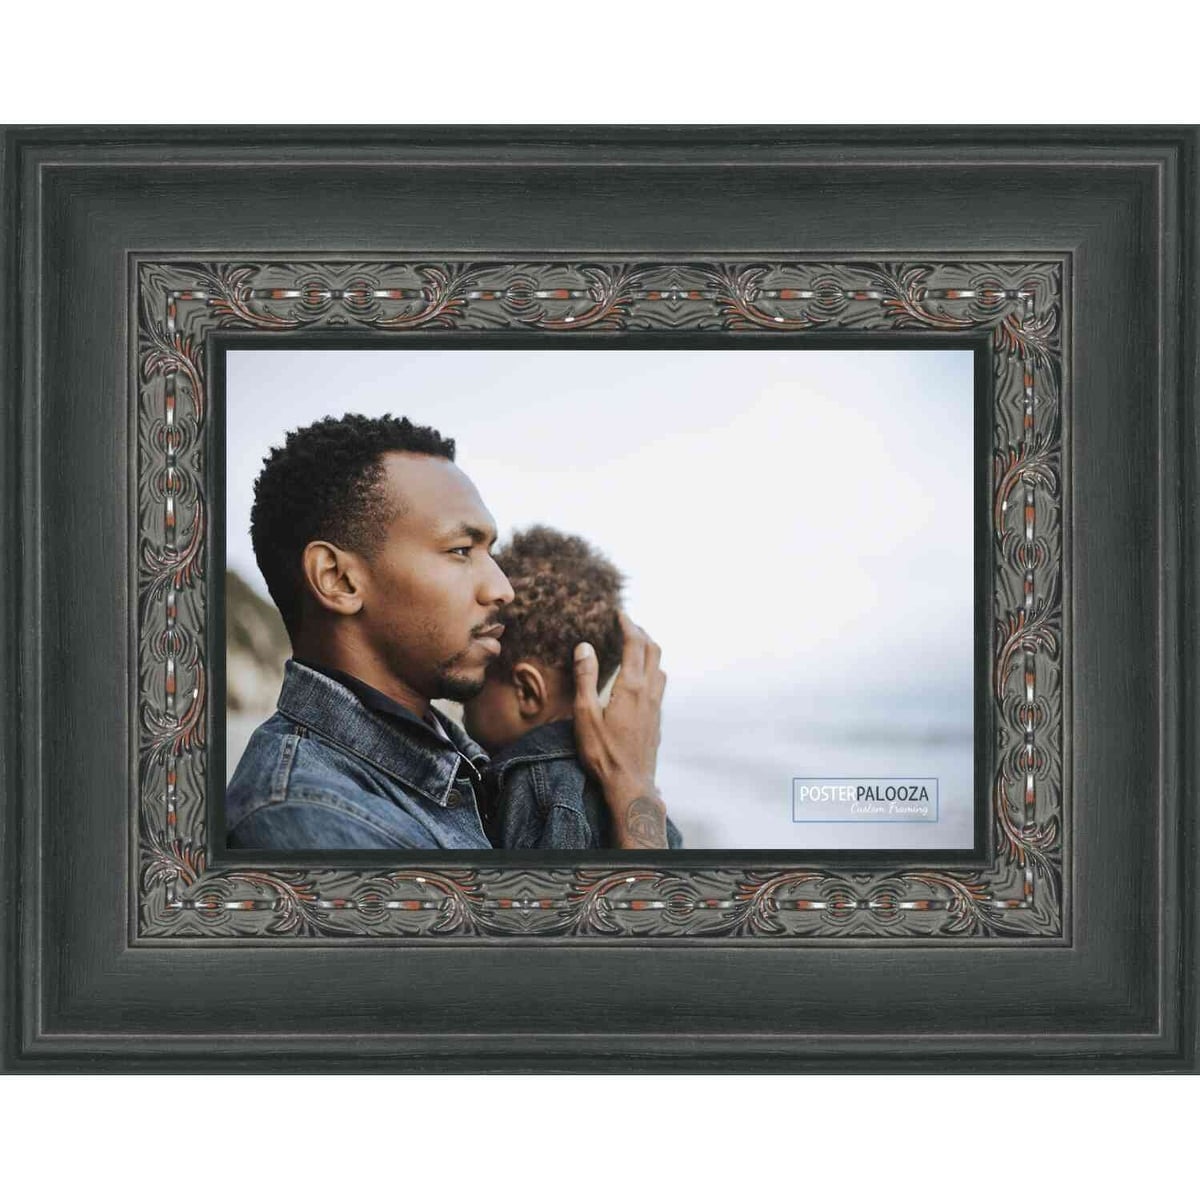 4x7 Picture Frame 